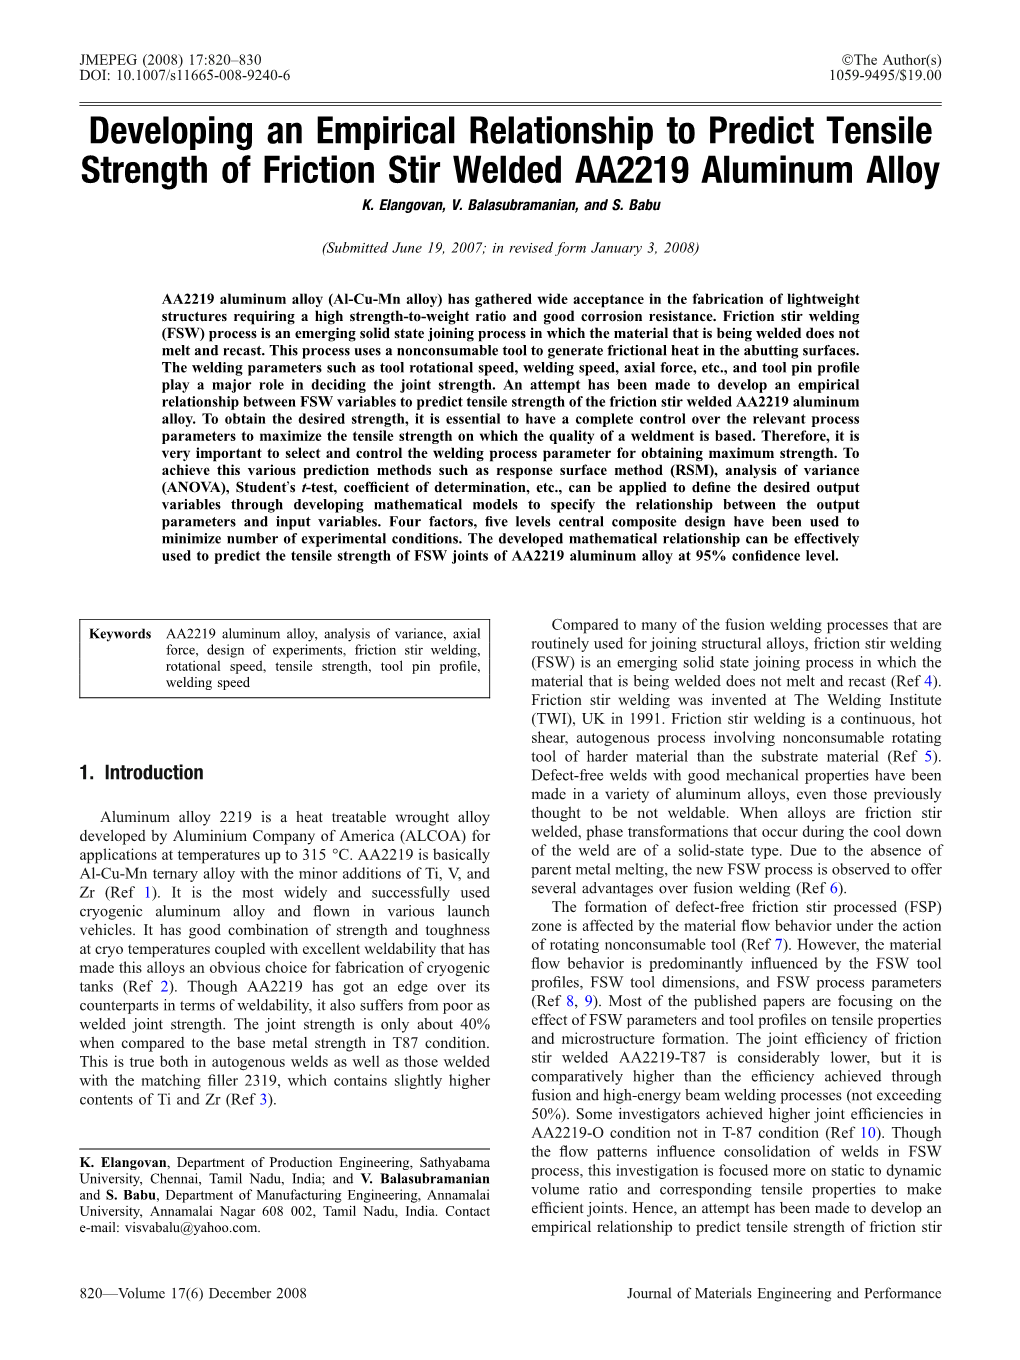 Developing an Empirical Relationship to Predict Tensile Strength of Friction Stir Welded AA2219 Aluminum Alloy K